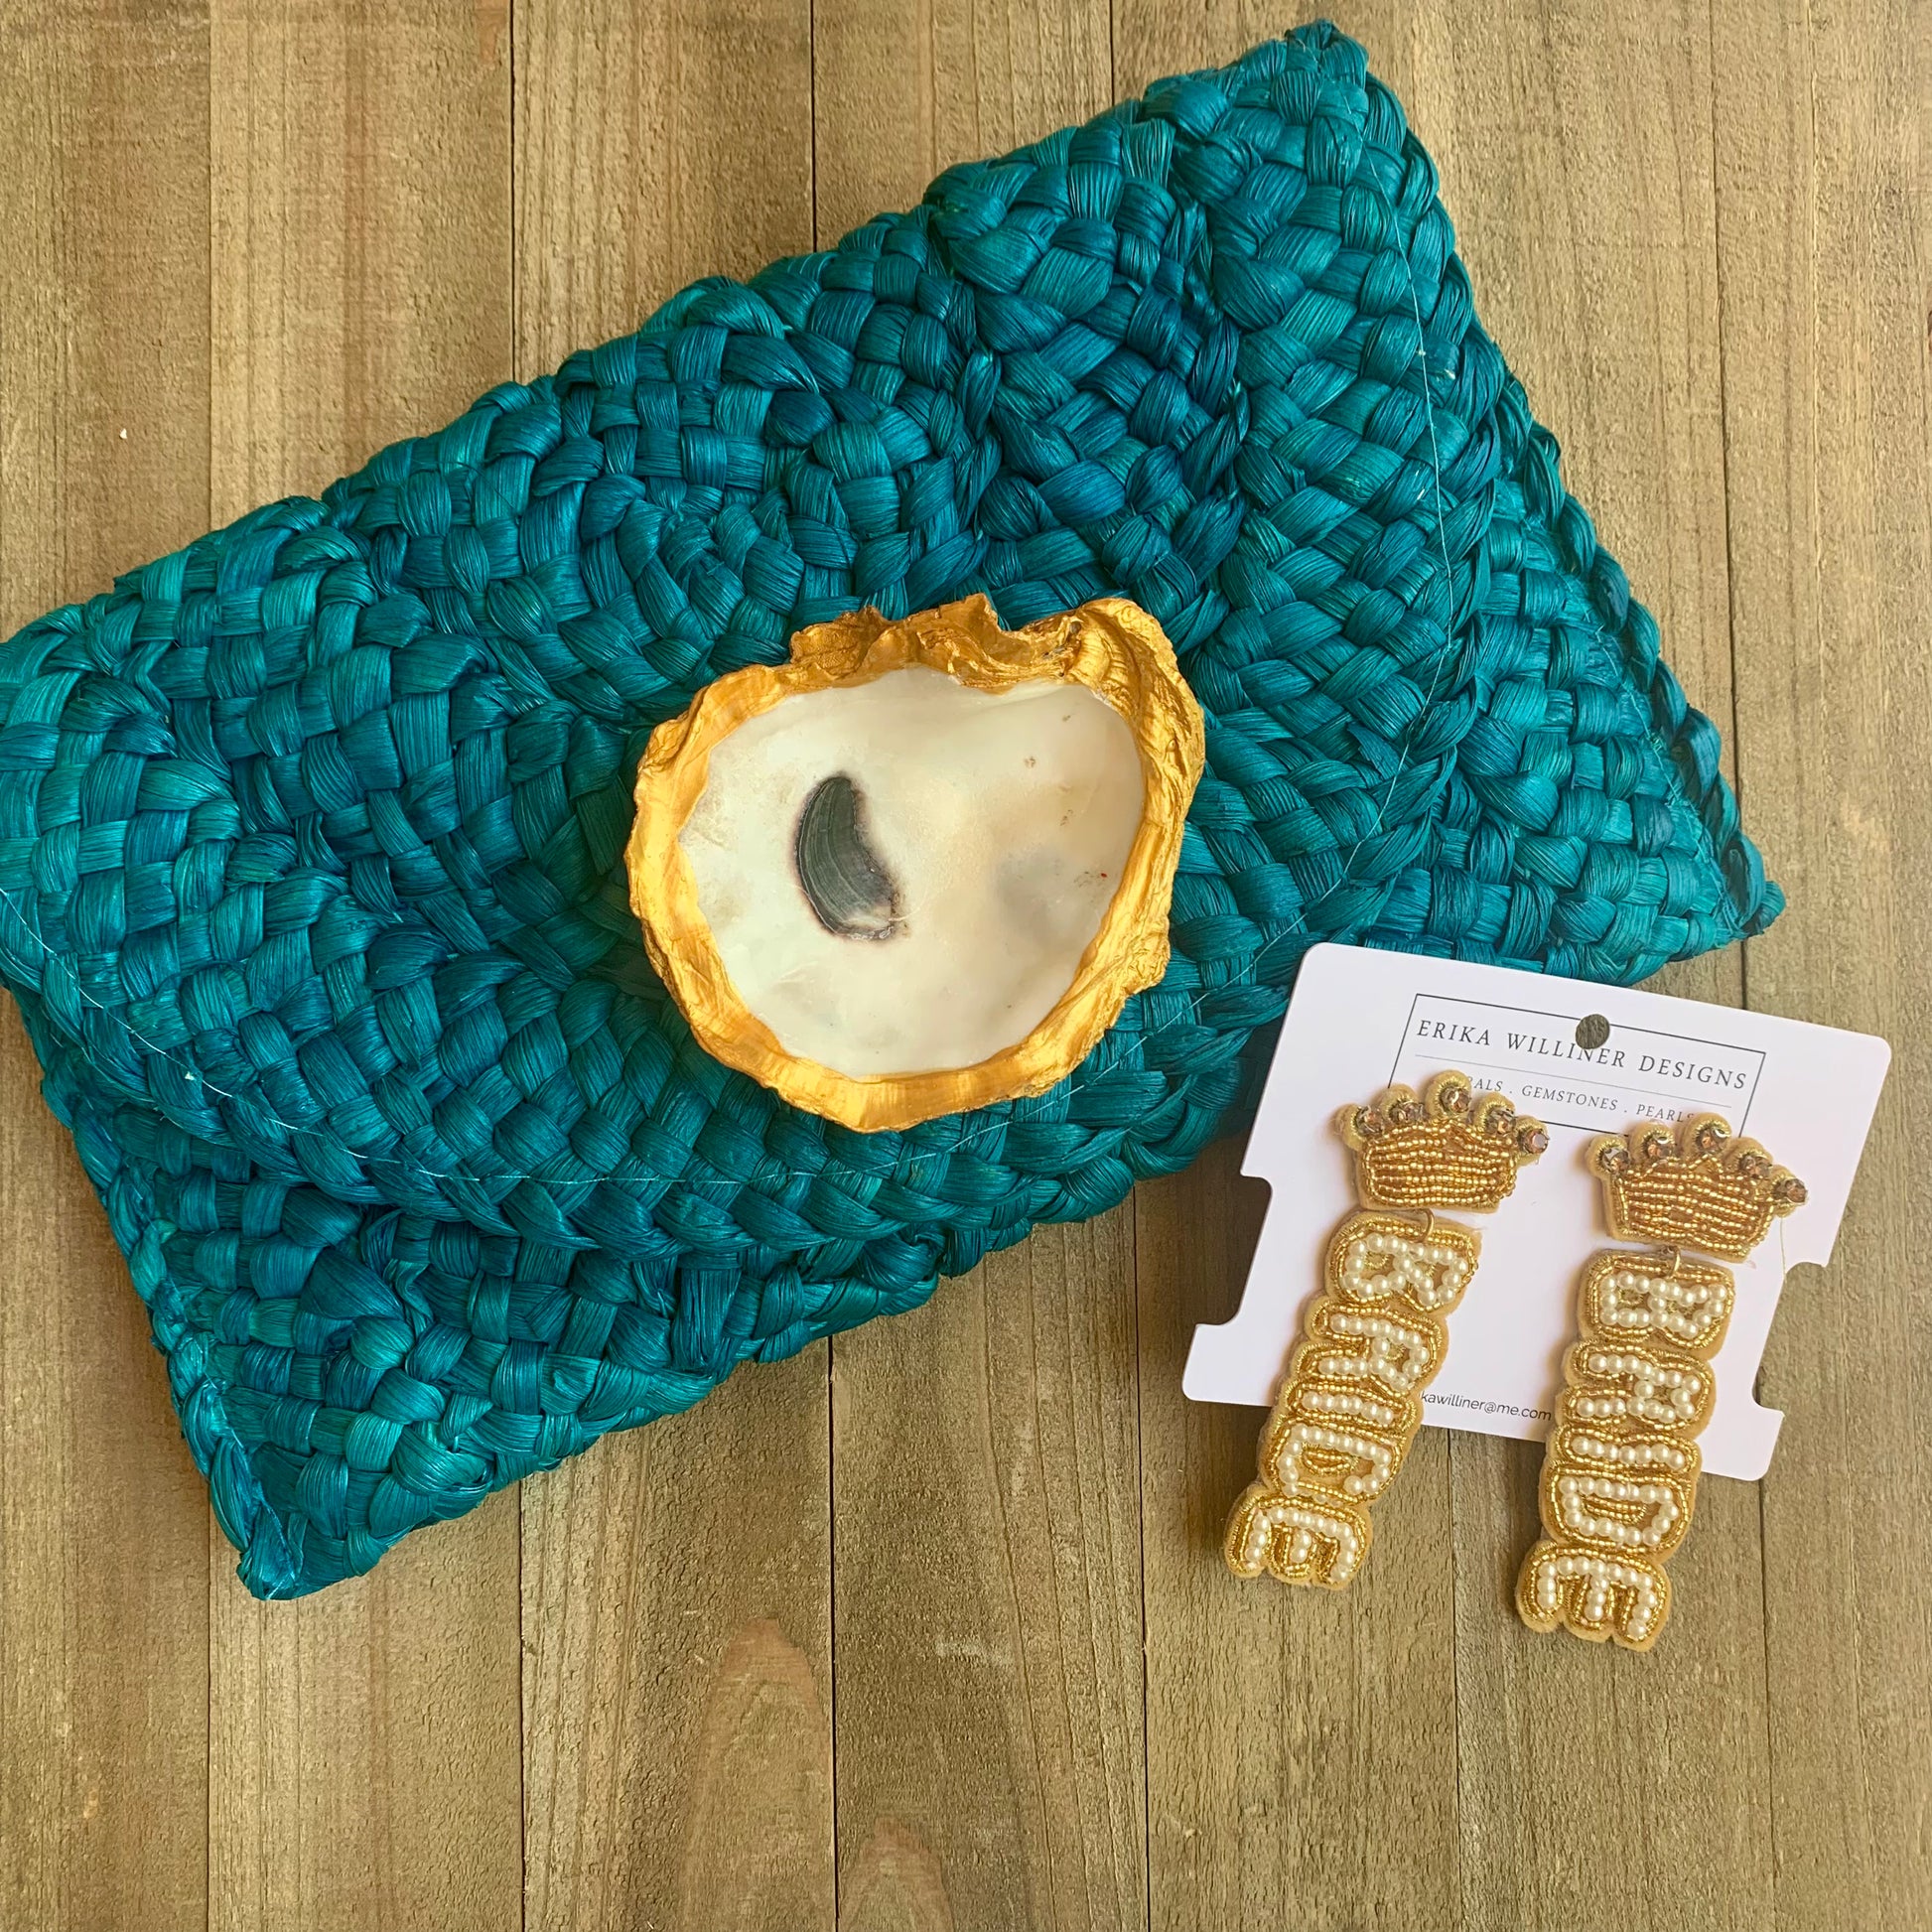 Bride earrings beside a classic erika willner turquoise purse